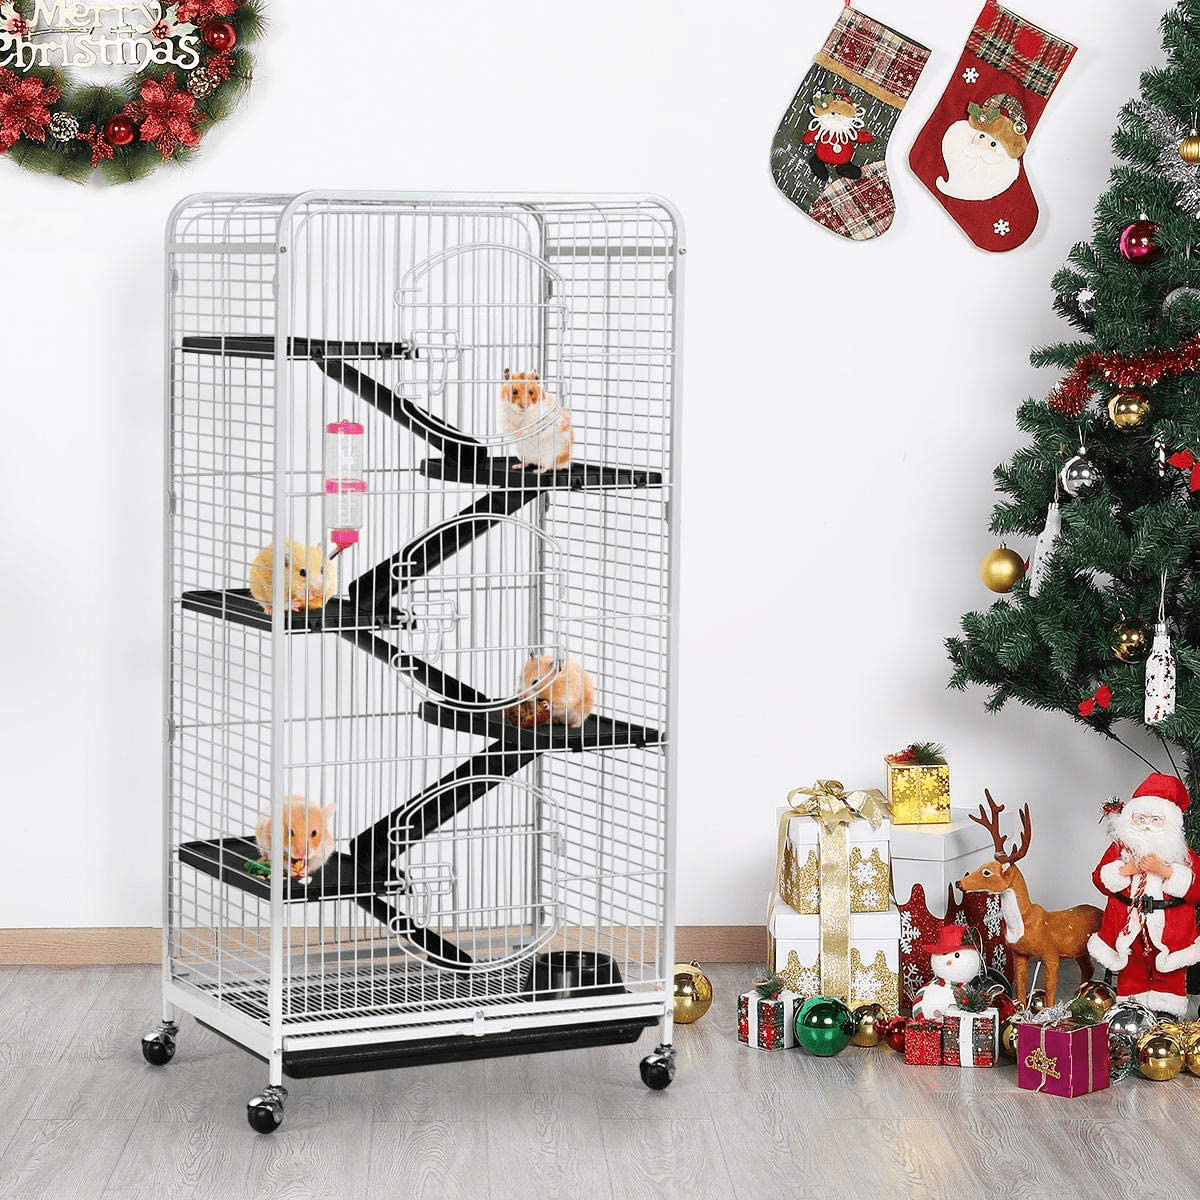 YAHEETECH 37/52-Inch Metal Ferret Chinchilla Cage Small Animals Hutch with 2 Front Doors/3 Front Doors/Feeder/Wheels for Squirrel Indoor Outdoor